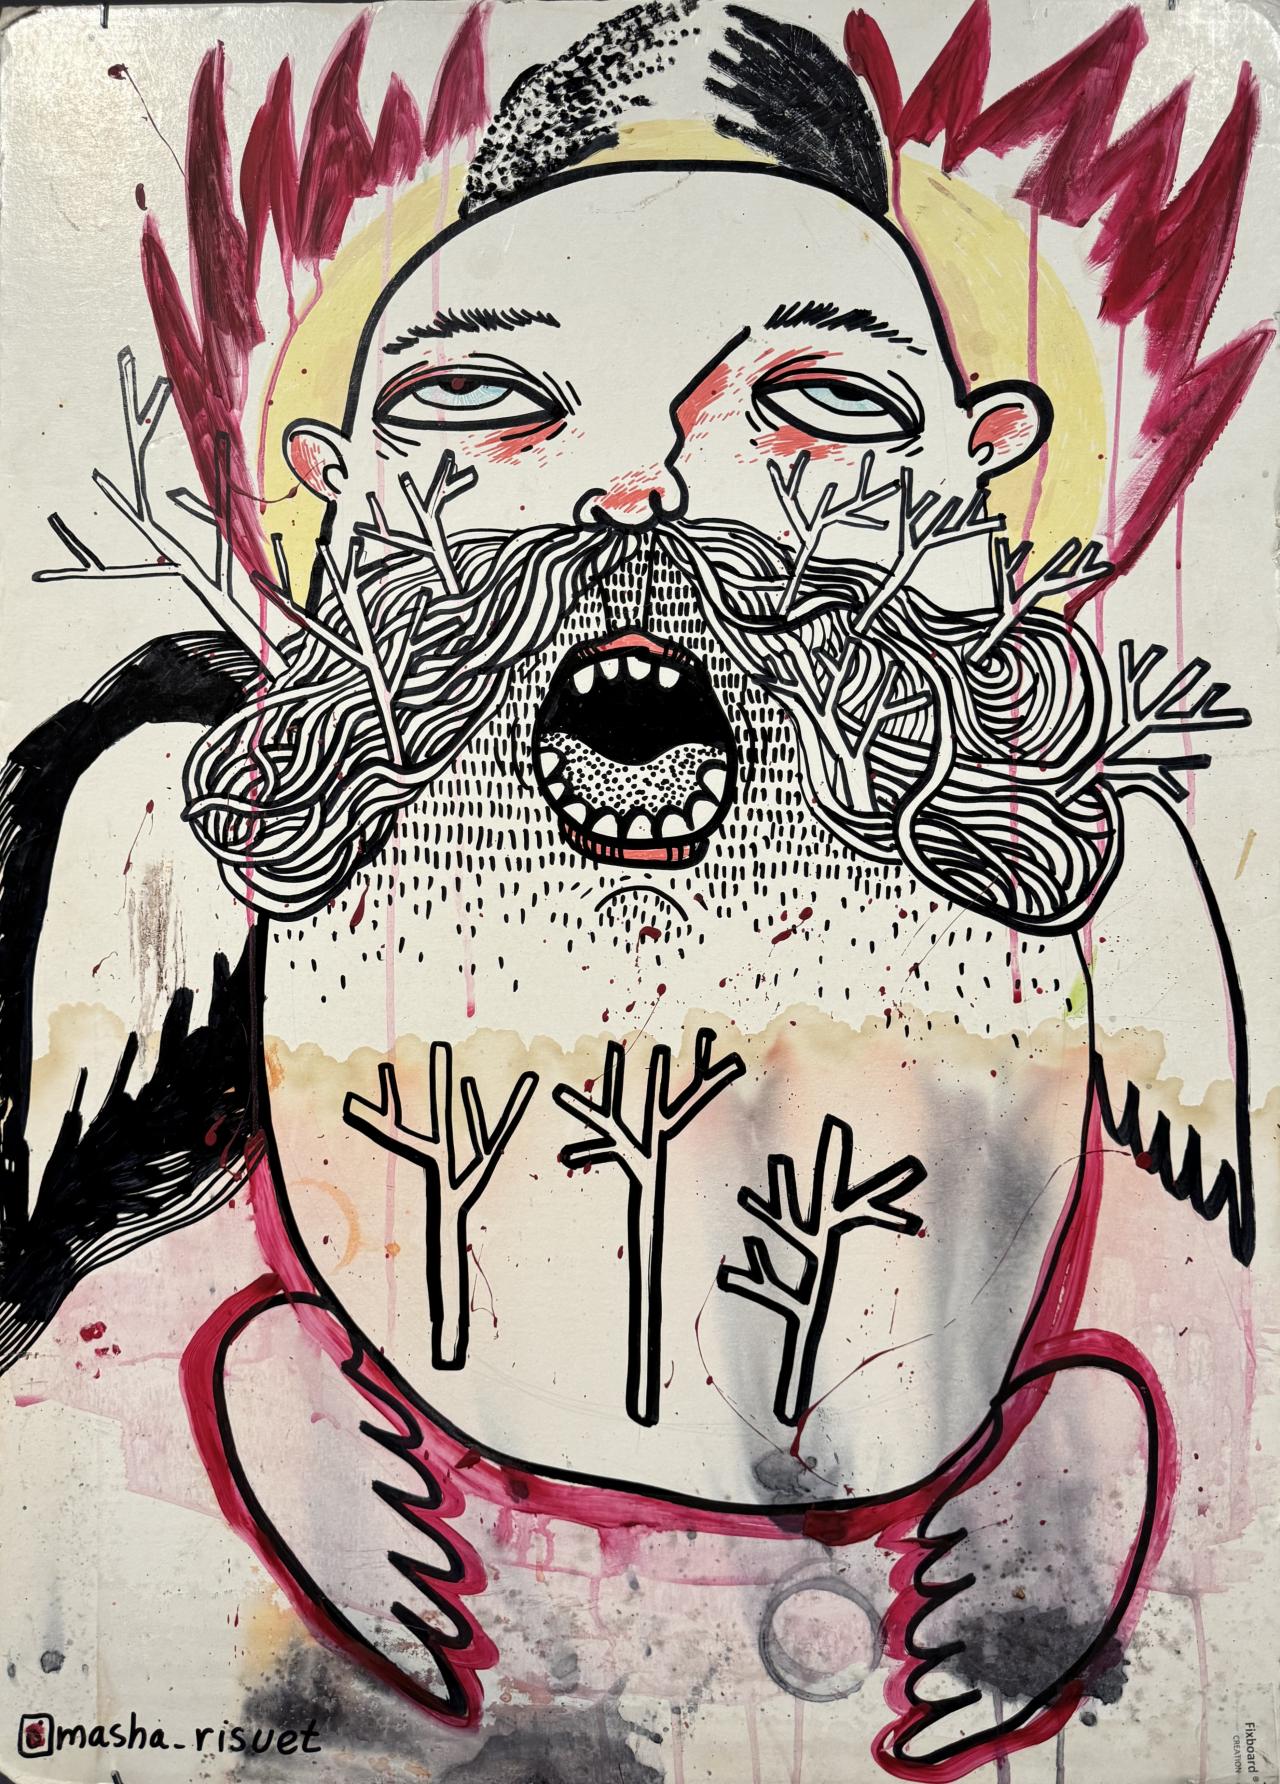 A face is depicted on a white background with an open mouth and a beard made up of branches. Wings representing arms and legs are painted around the abstract face.